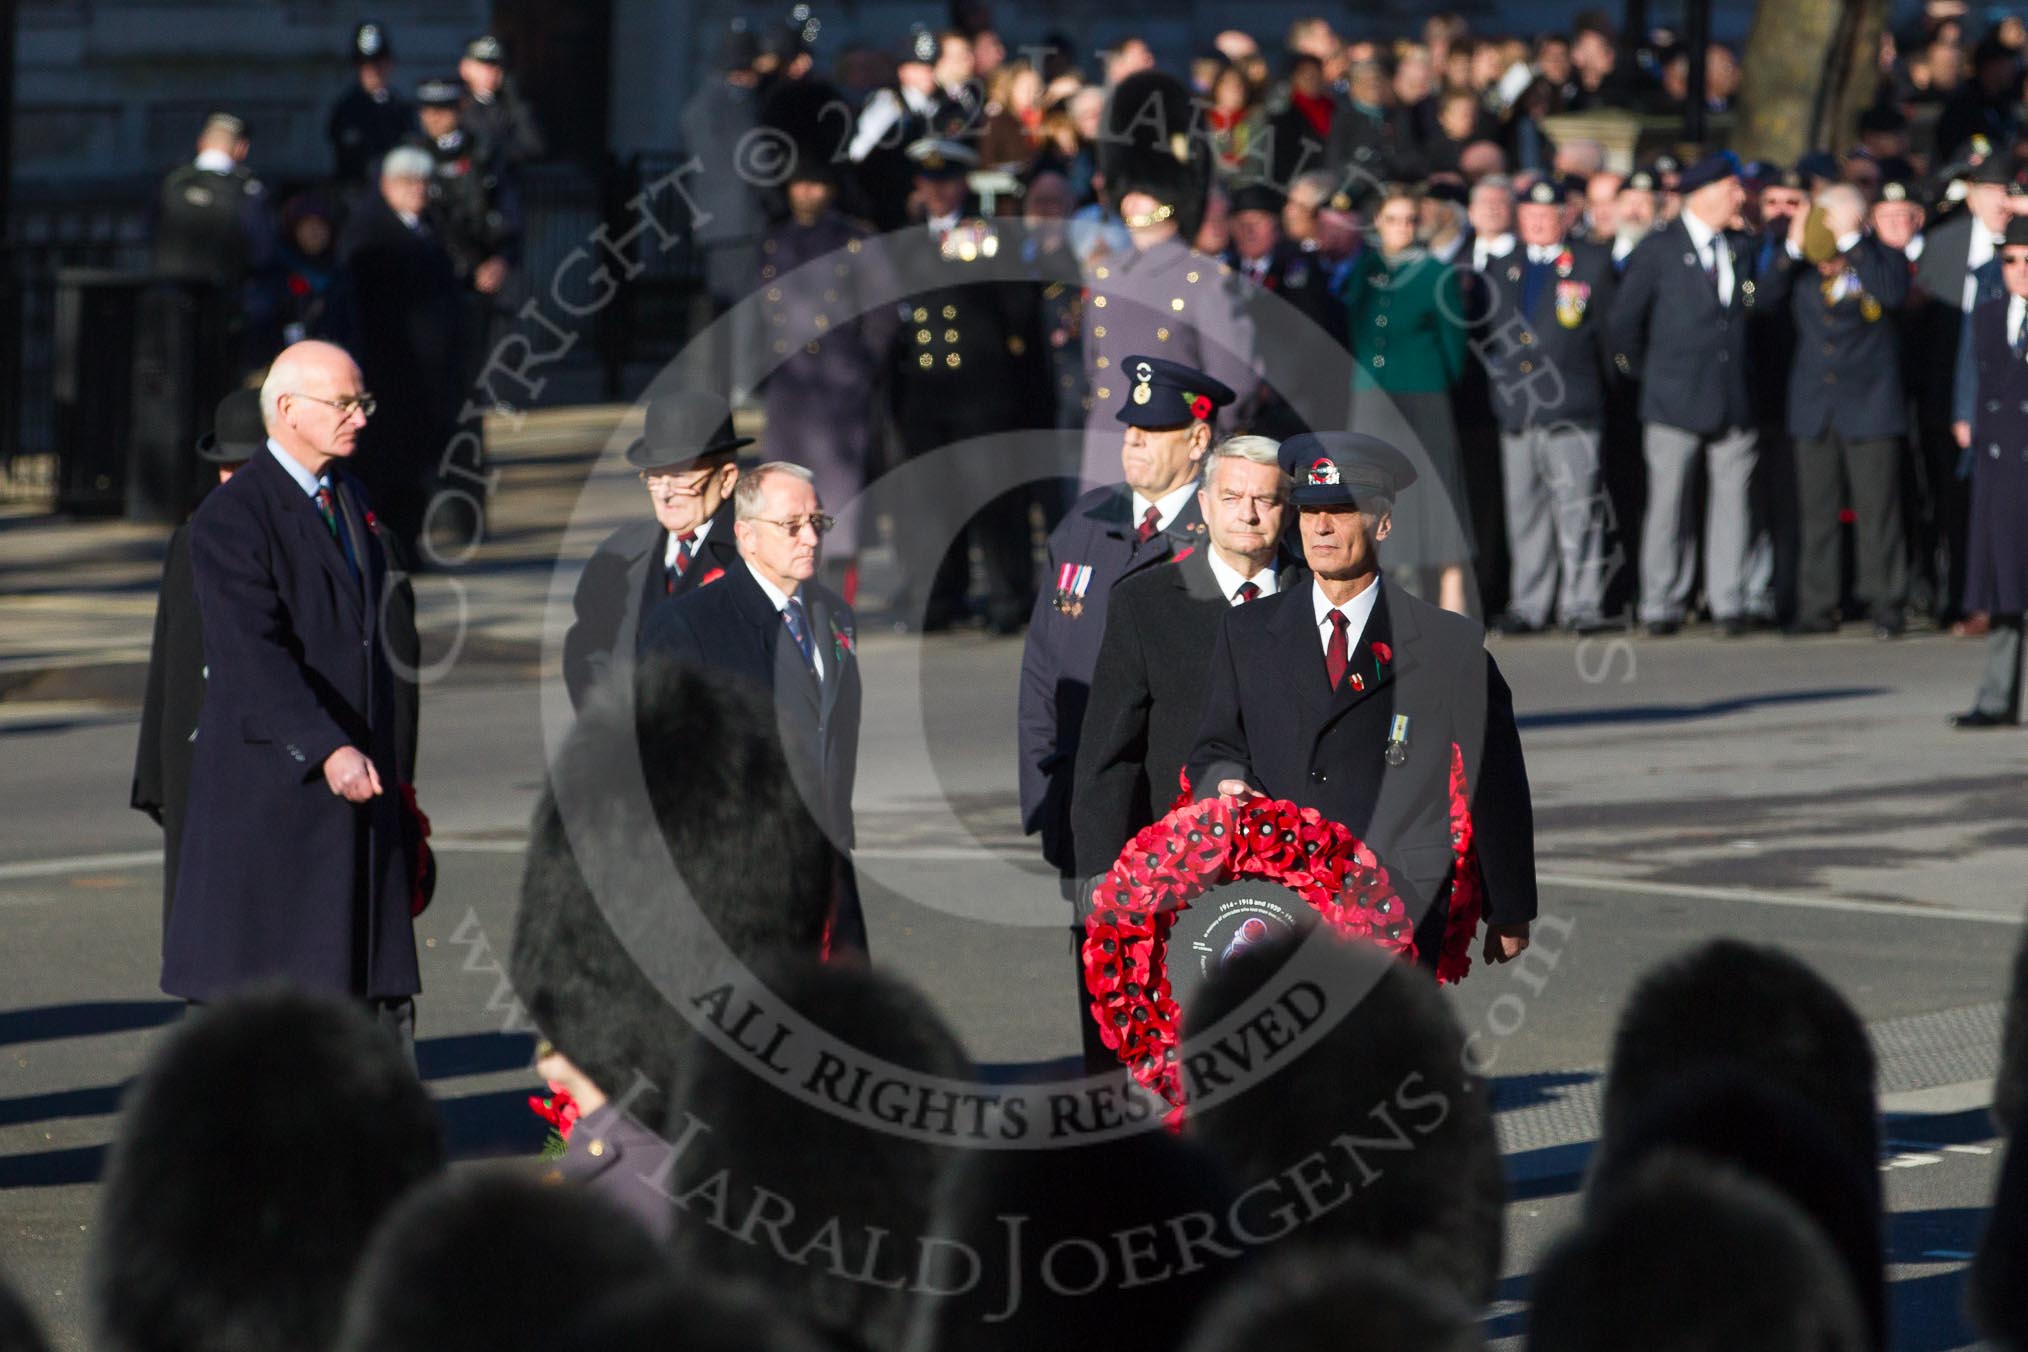 Remembrance Sunday 2012 Cenotaph March Past: Peter Orchard, for London Transport, is the leading the first group..
Whitehall, Cenotaph,
London SW1,

United Kingdom,
on 11 November 2012 at 11:28, image #11